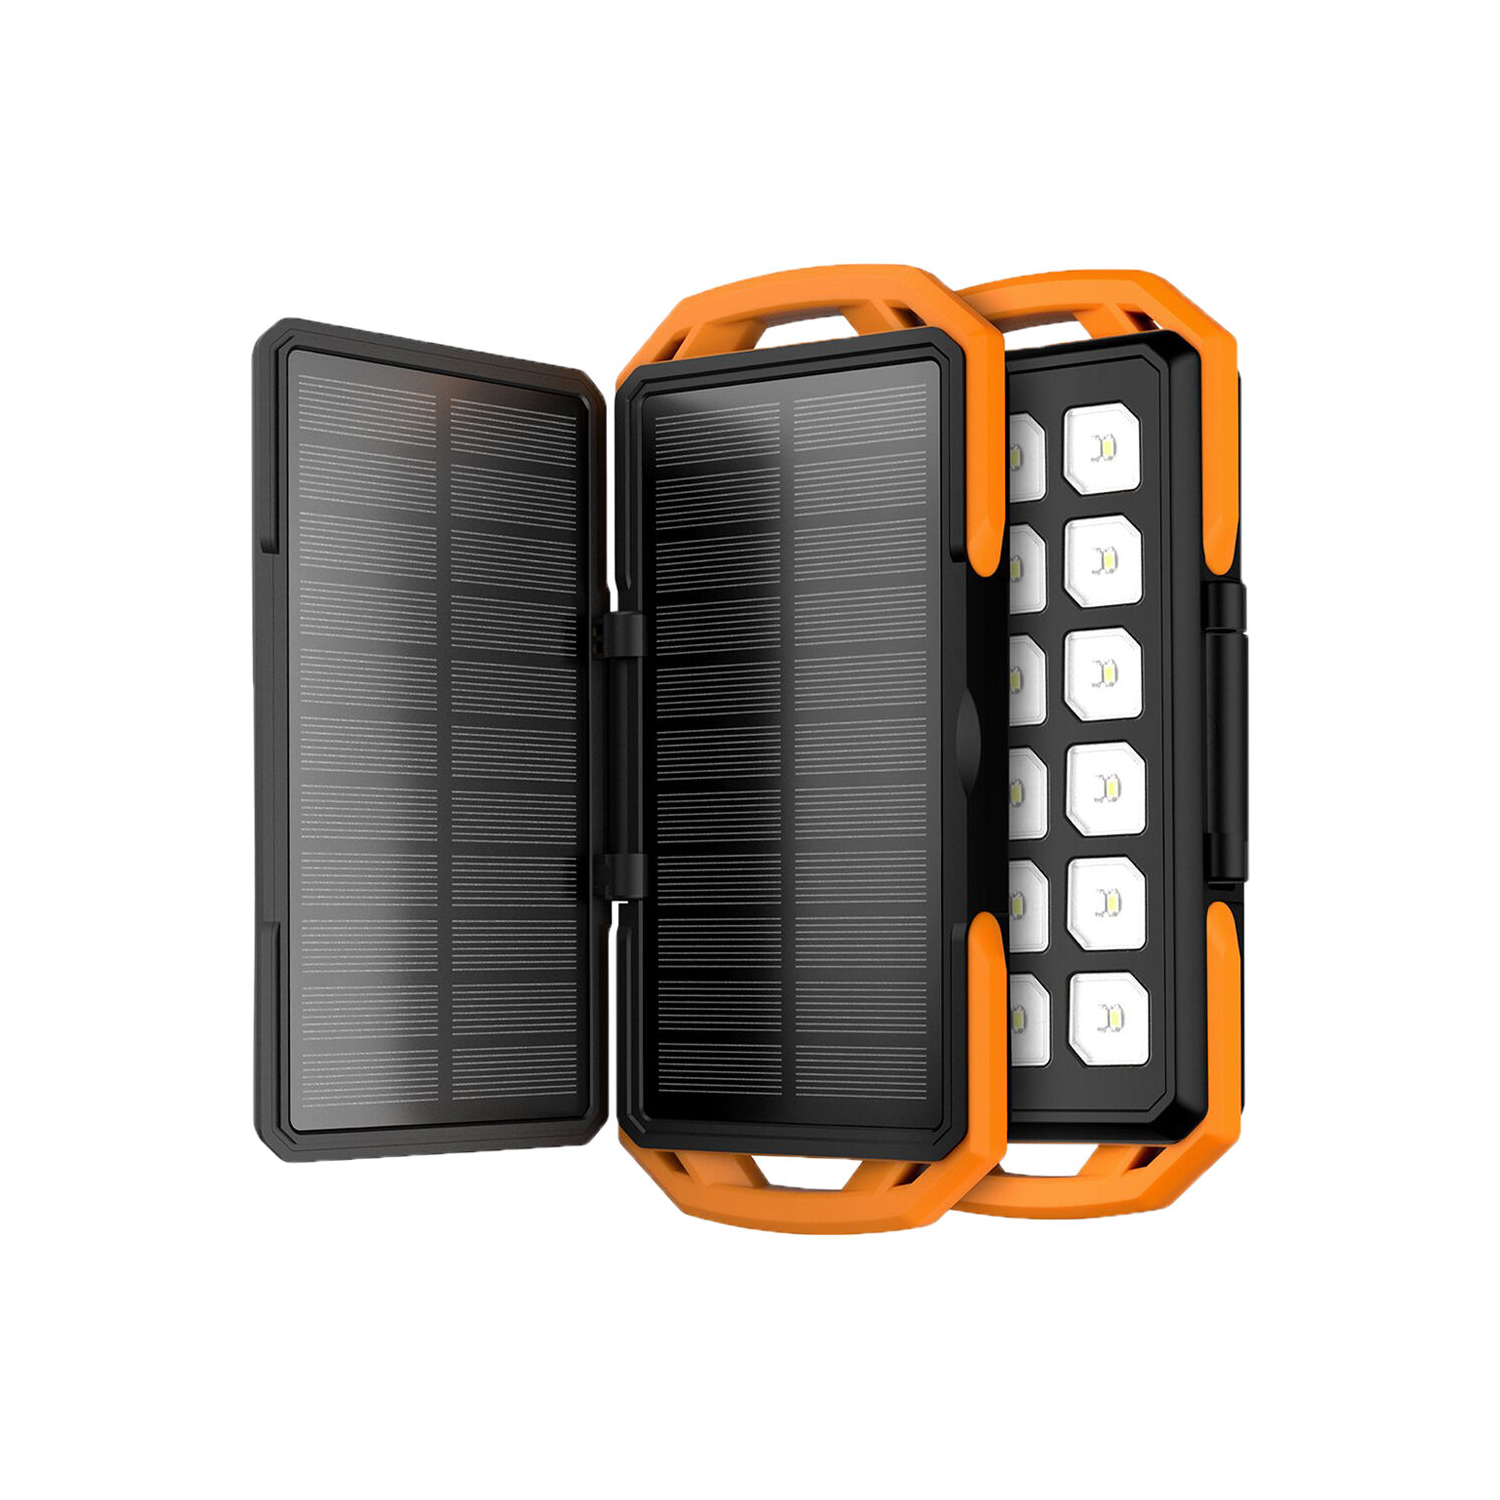 ToughTested Switch Back 10,000mAh Solar Power Bank